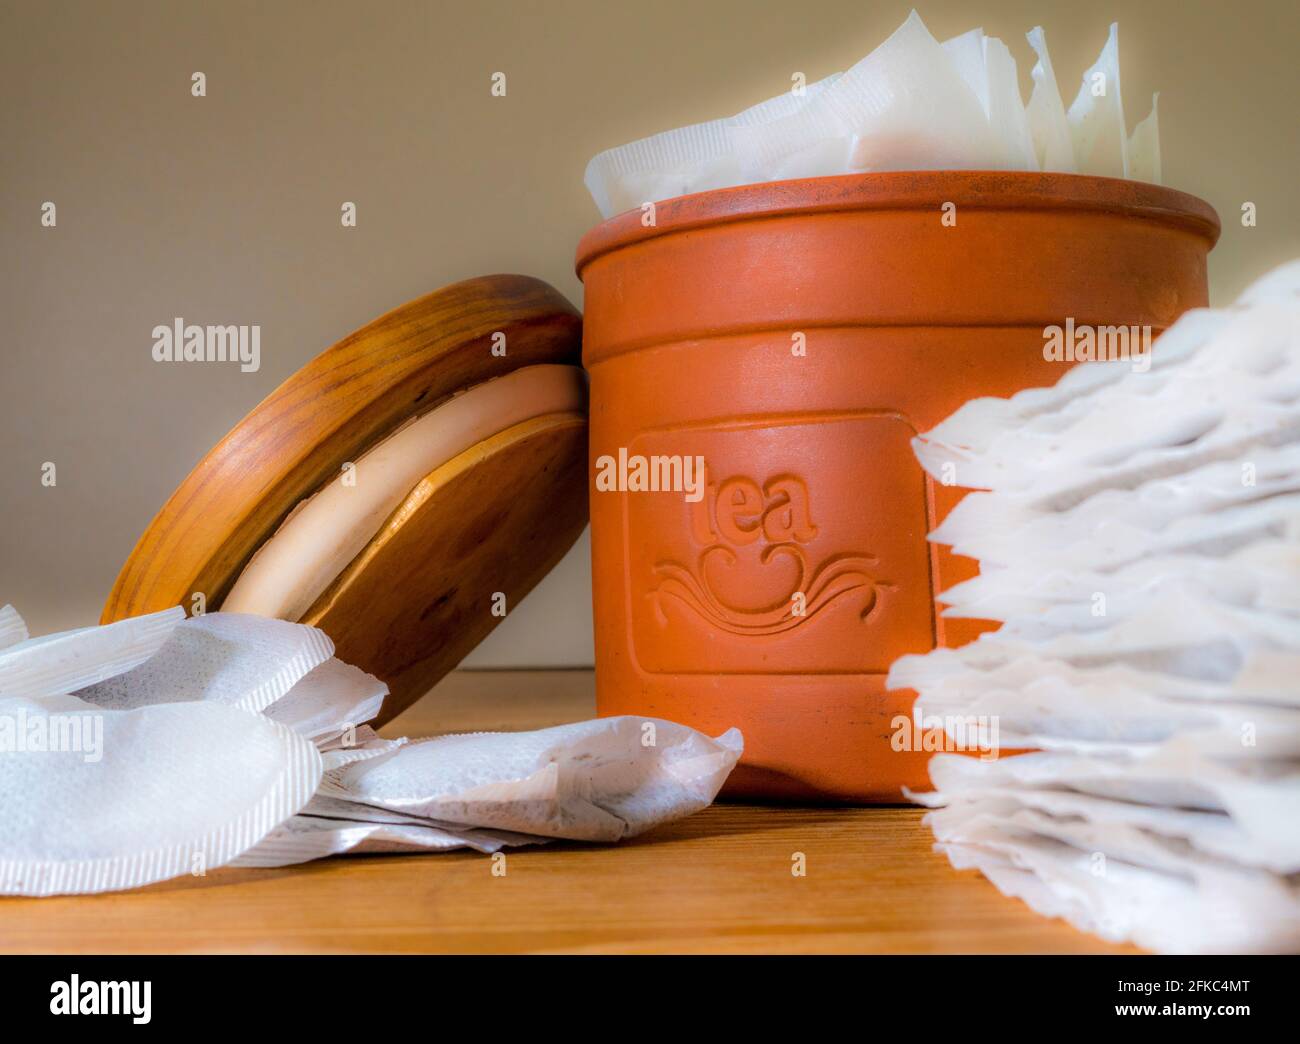 Closeup of tea bags in and around a terracotta storage container and its sealing lid. Stock Photo